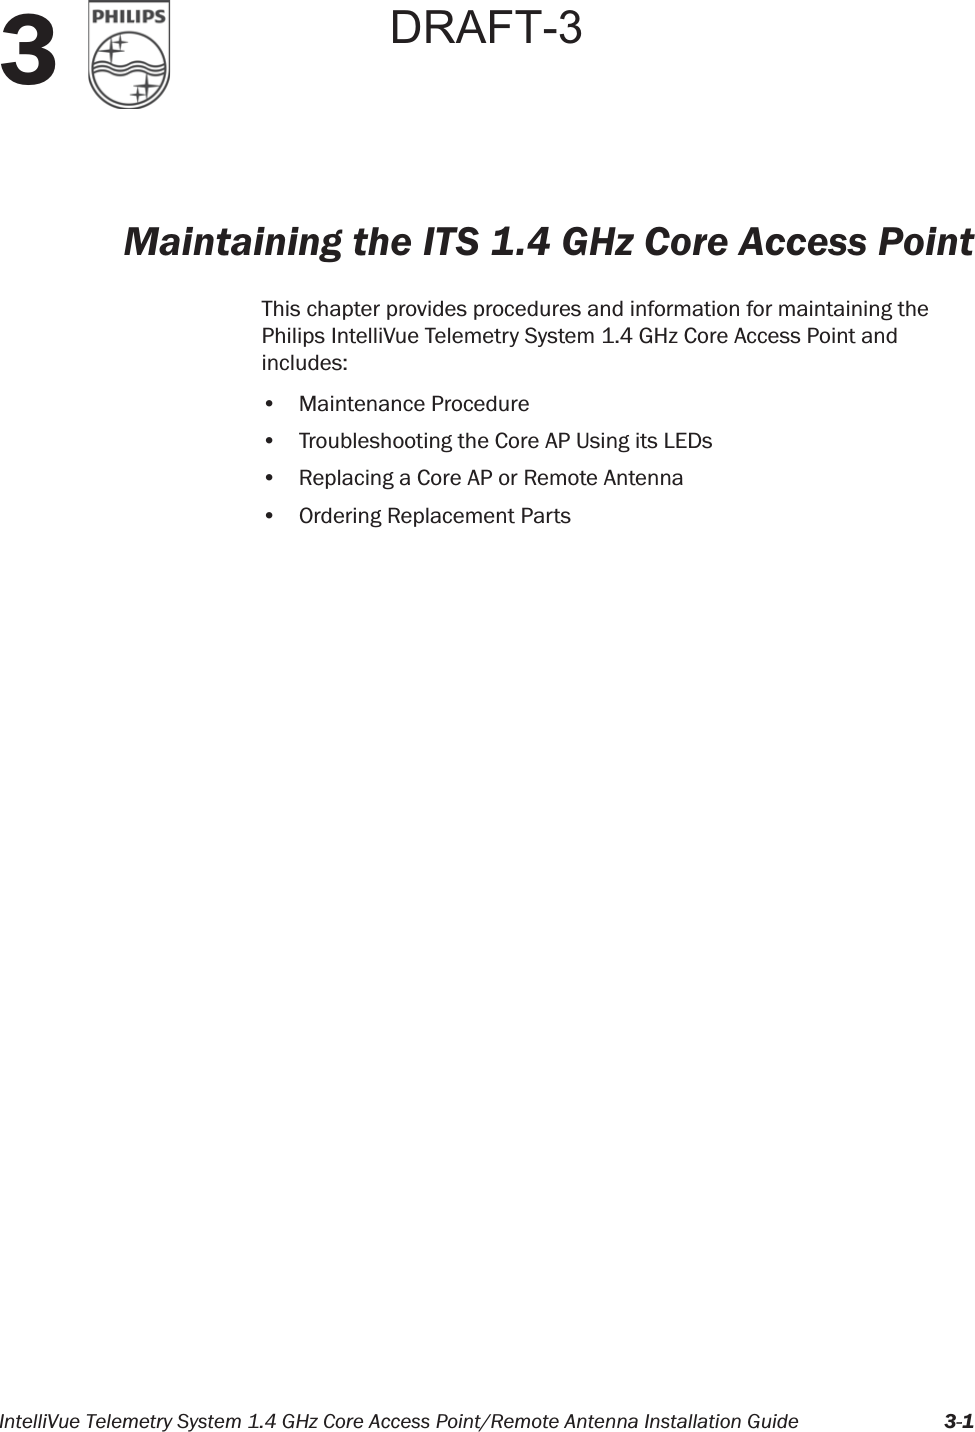 IntelliVue Telemetry System 1.4 GHz Core Access Point/Remote Antenna Installation Guide 3-13Maintaining the ITS 1.4 GHz Core Access PointThis chapter provides procedures and information for maintaining the Philips IntelliVue Telemetry System 1.4 GHz Core Access Point and includes:• Maintenance Procedure• Troubleshooting the Core AP Using its LEDs• Replacing a Core AP or Remote Antenna• Ordering Replacement PartsDRAFT-3